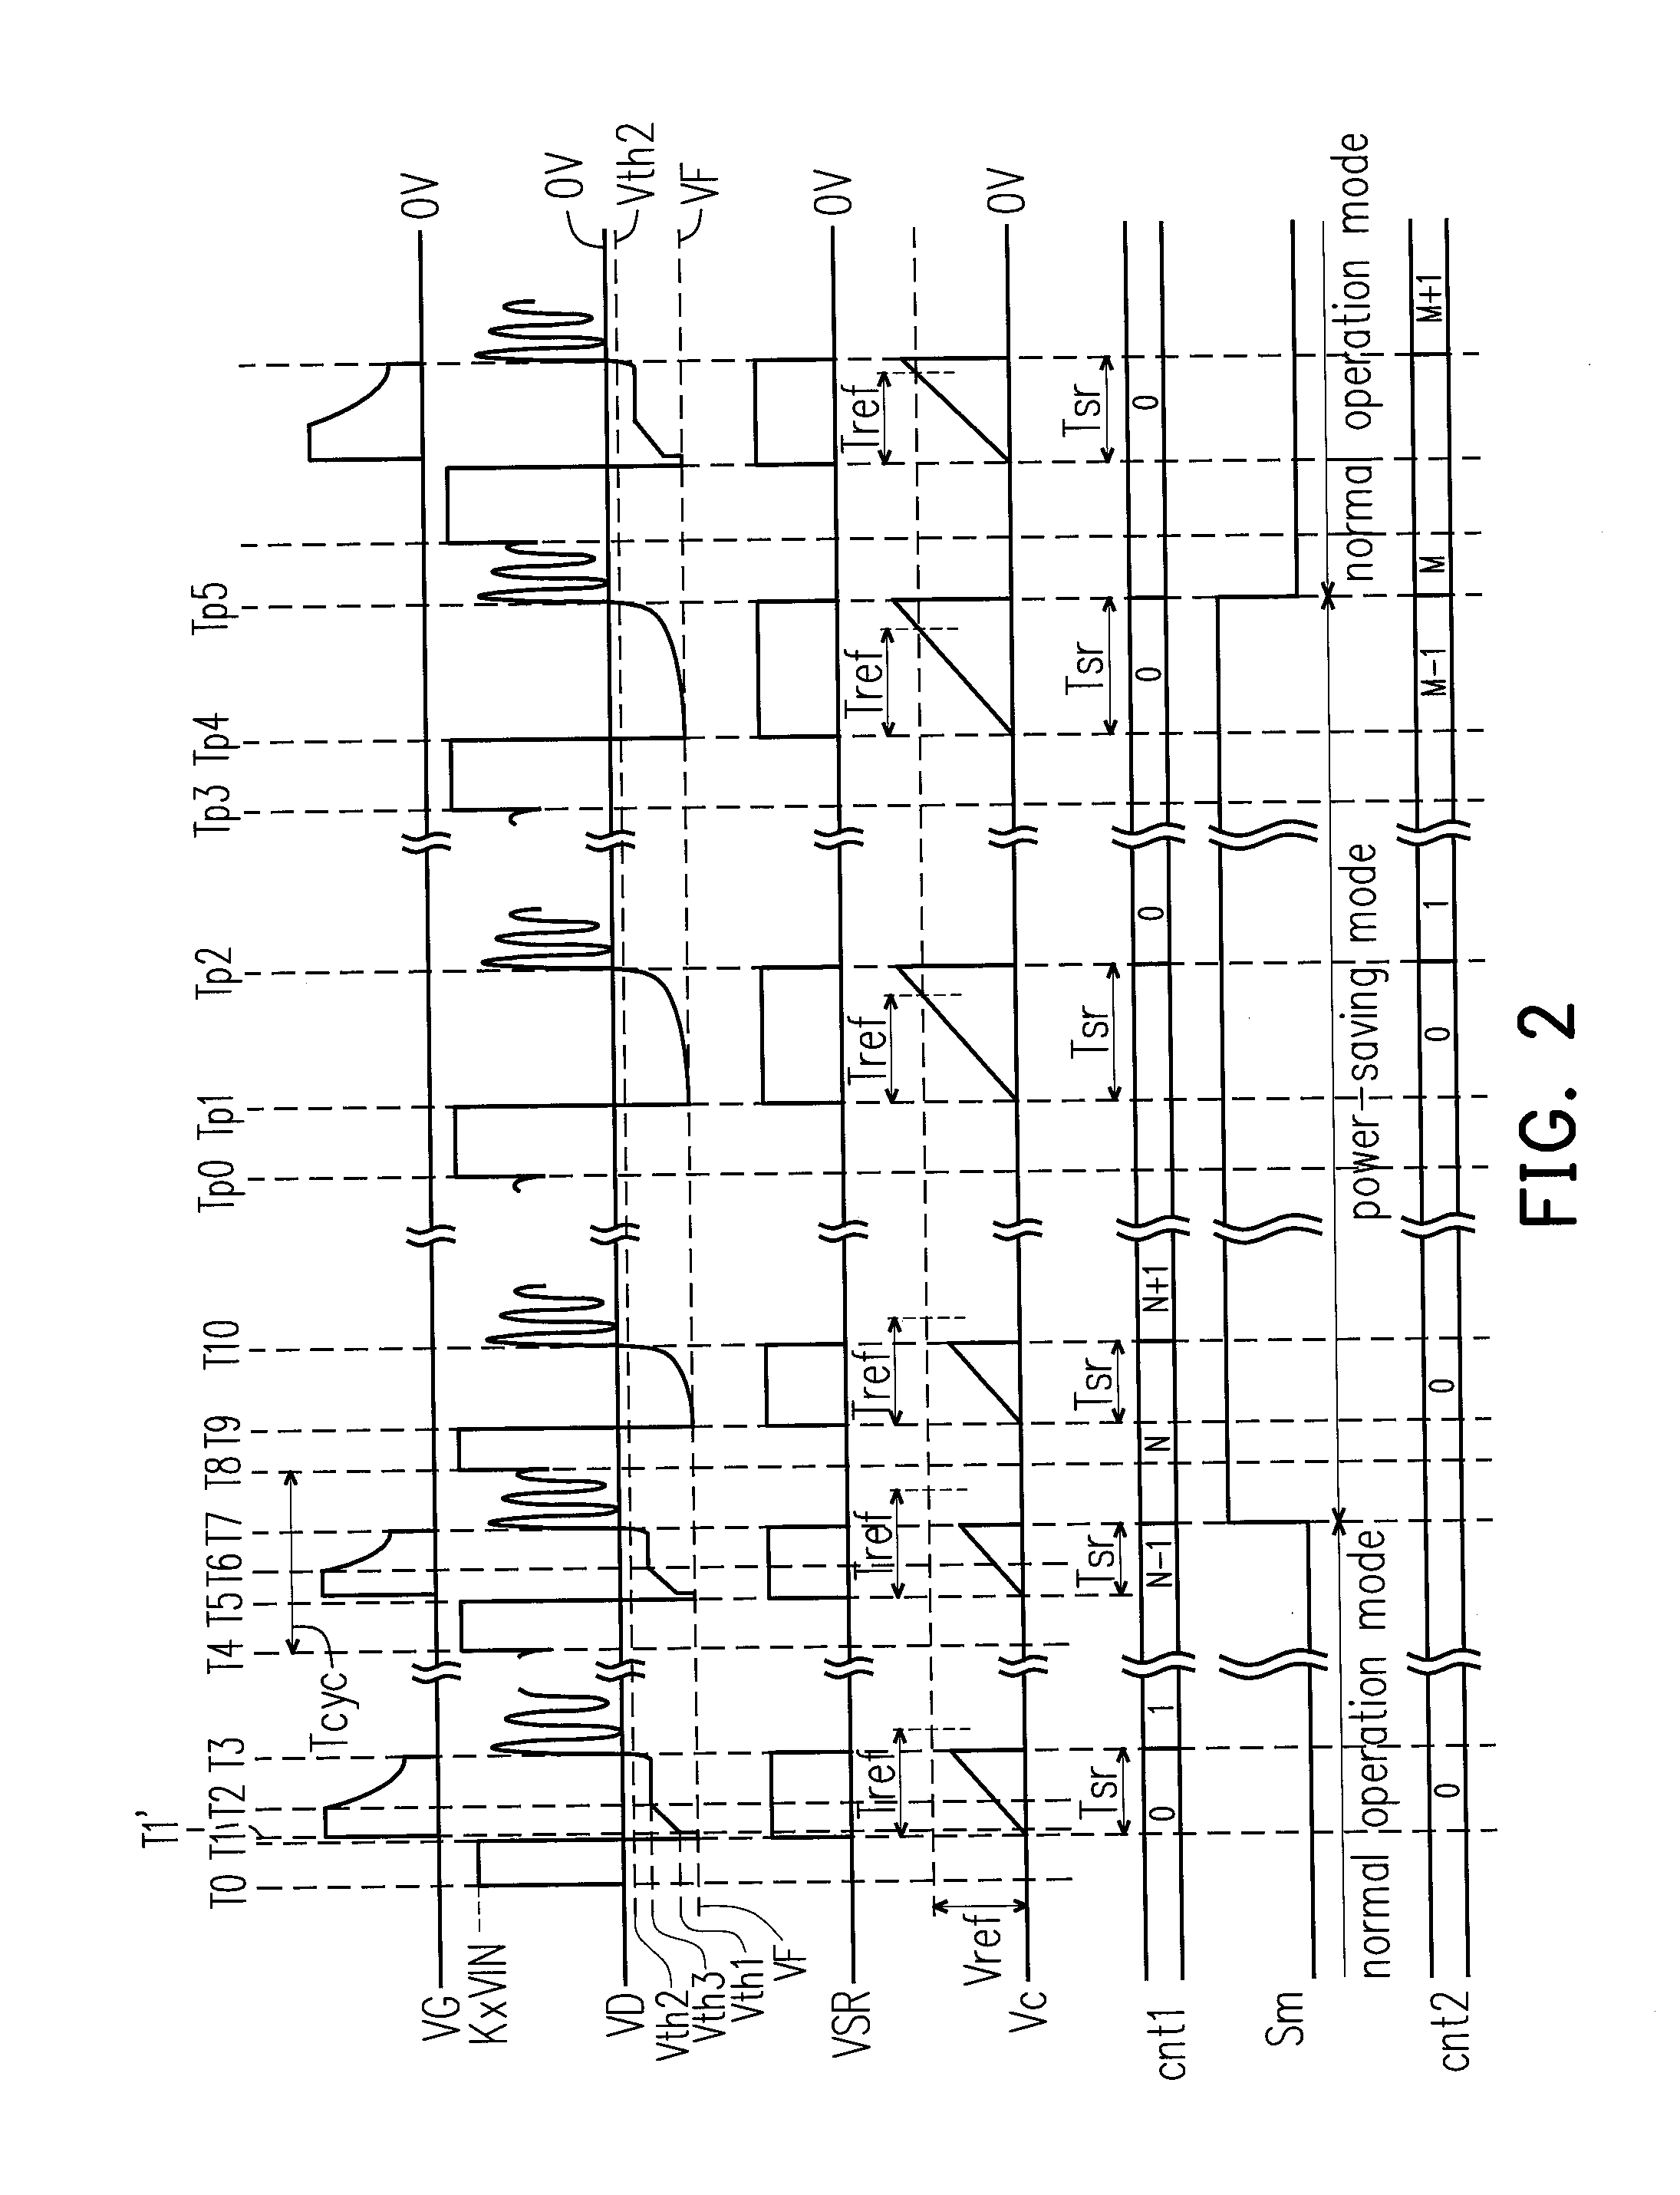 Power conversion apparatus with power saving and high conversion efficiency mechanisms